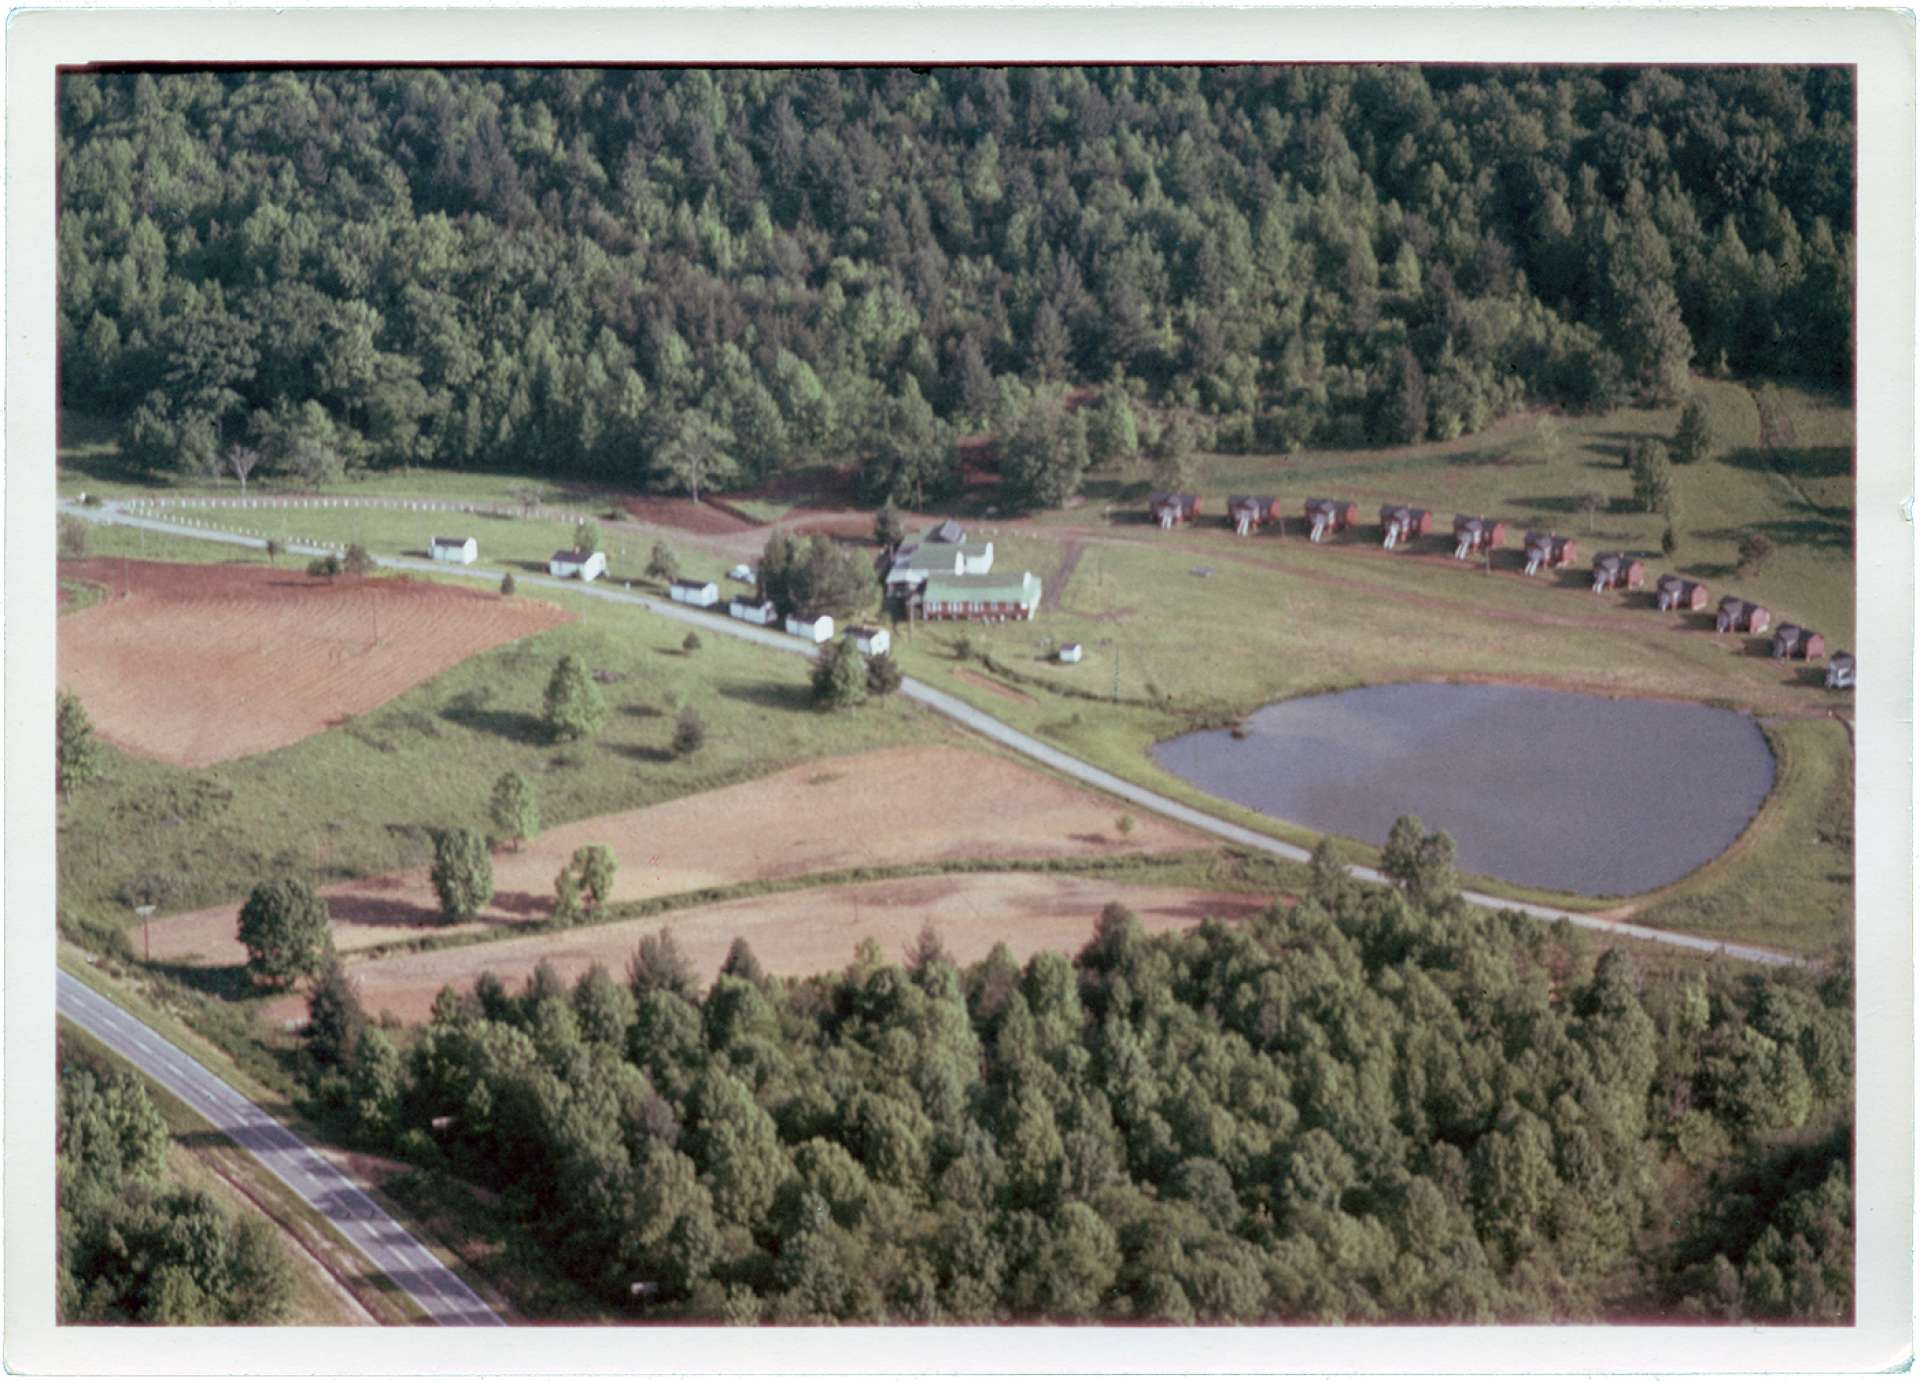 July 7, 1965 aerial photo of Shatley Springs Restaurant and cabins.